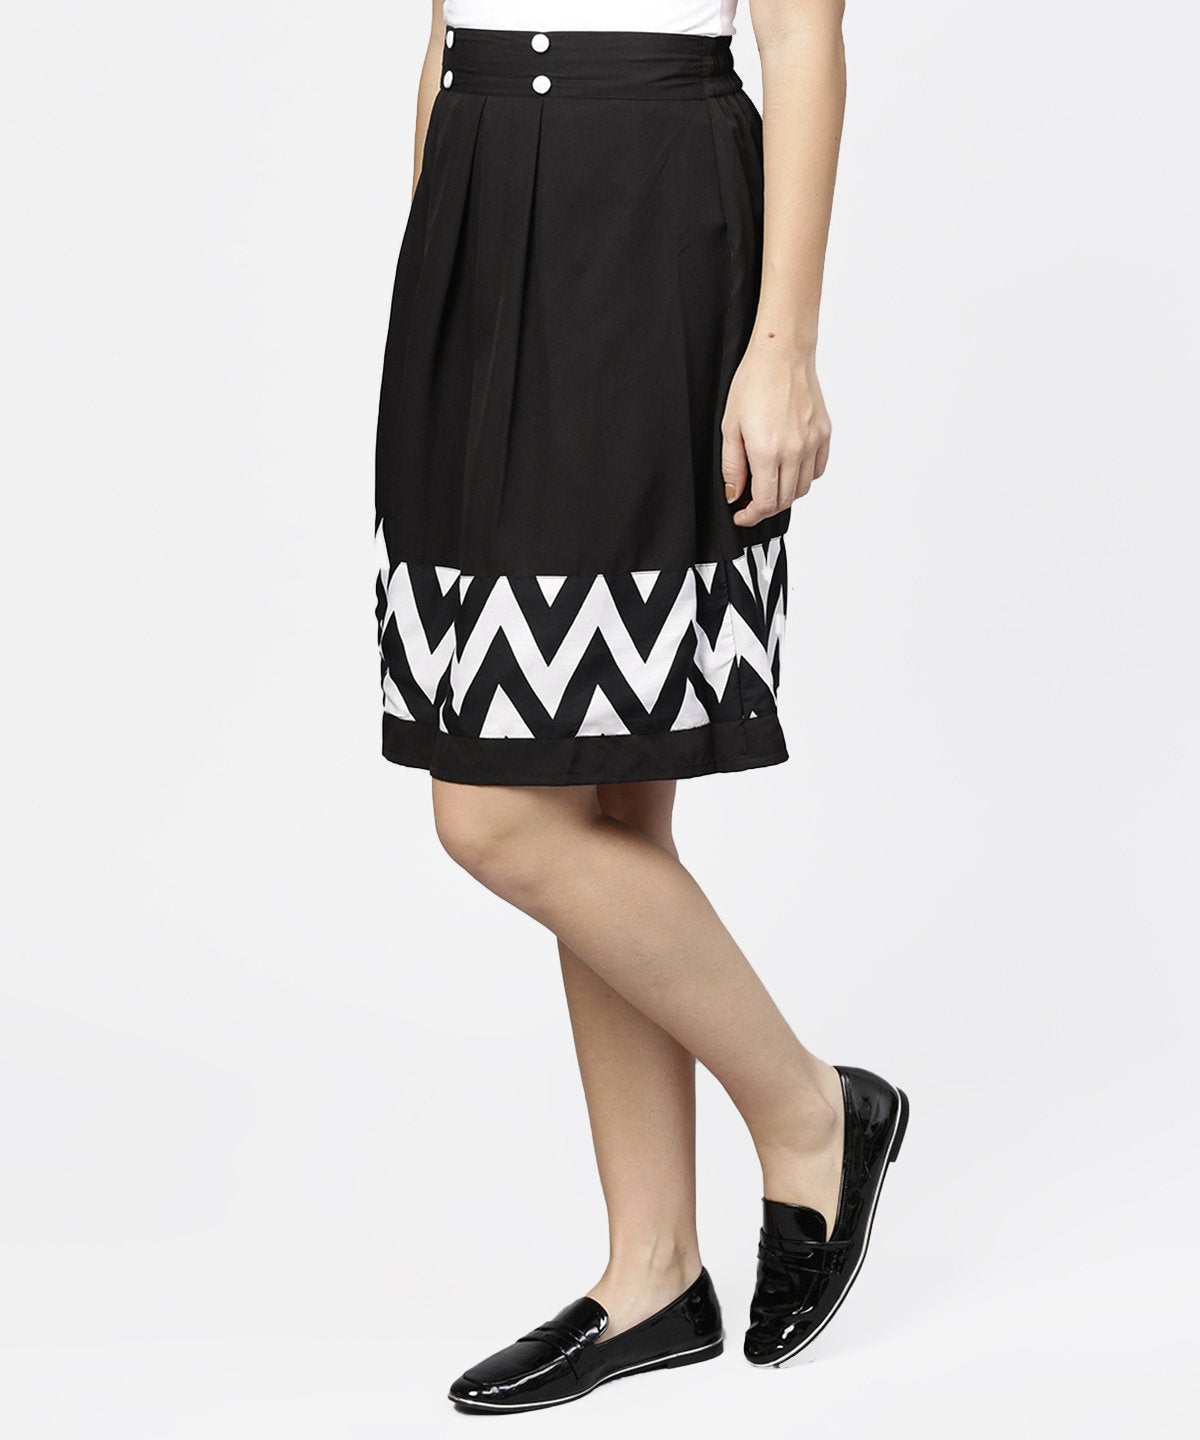 Women's Black & White Printed Flared Skirt With Button - Nayo Clothing